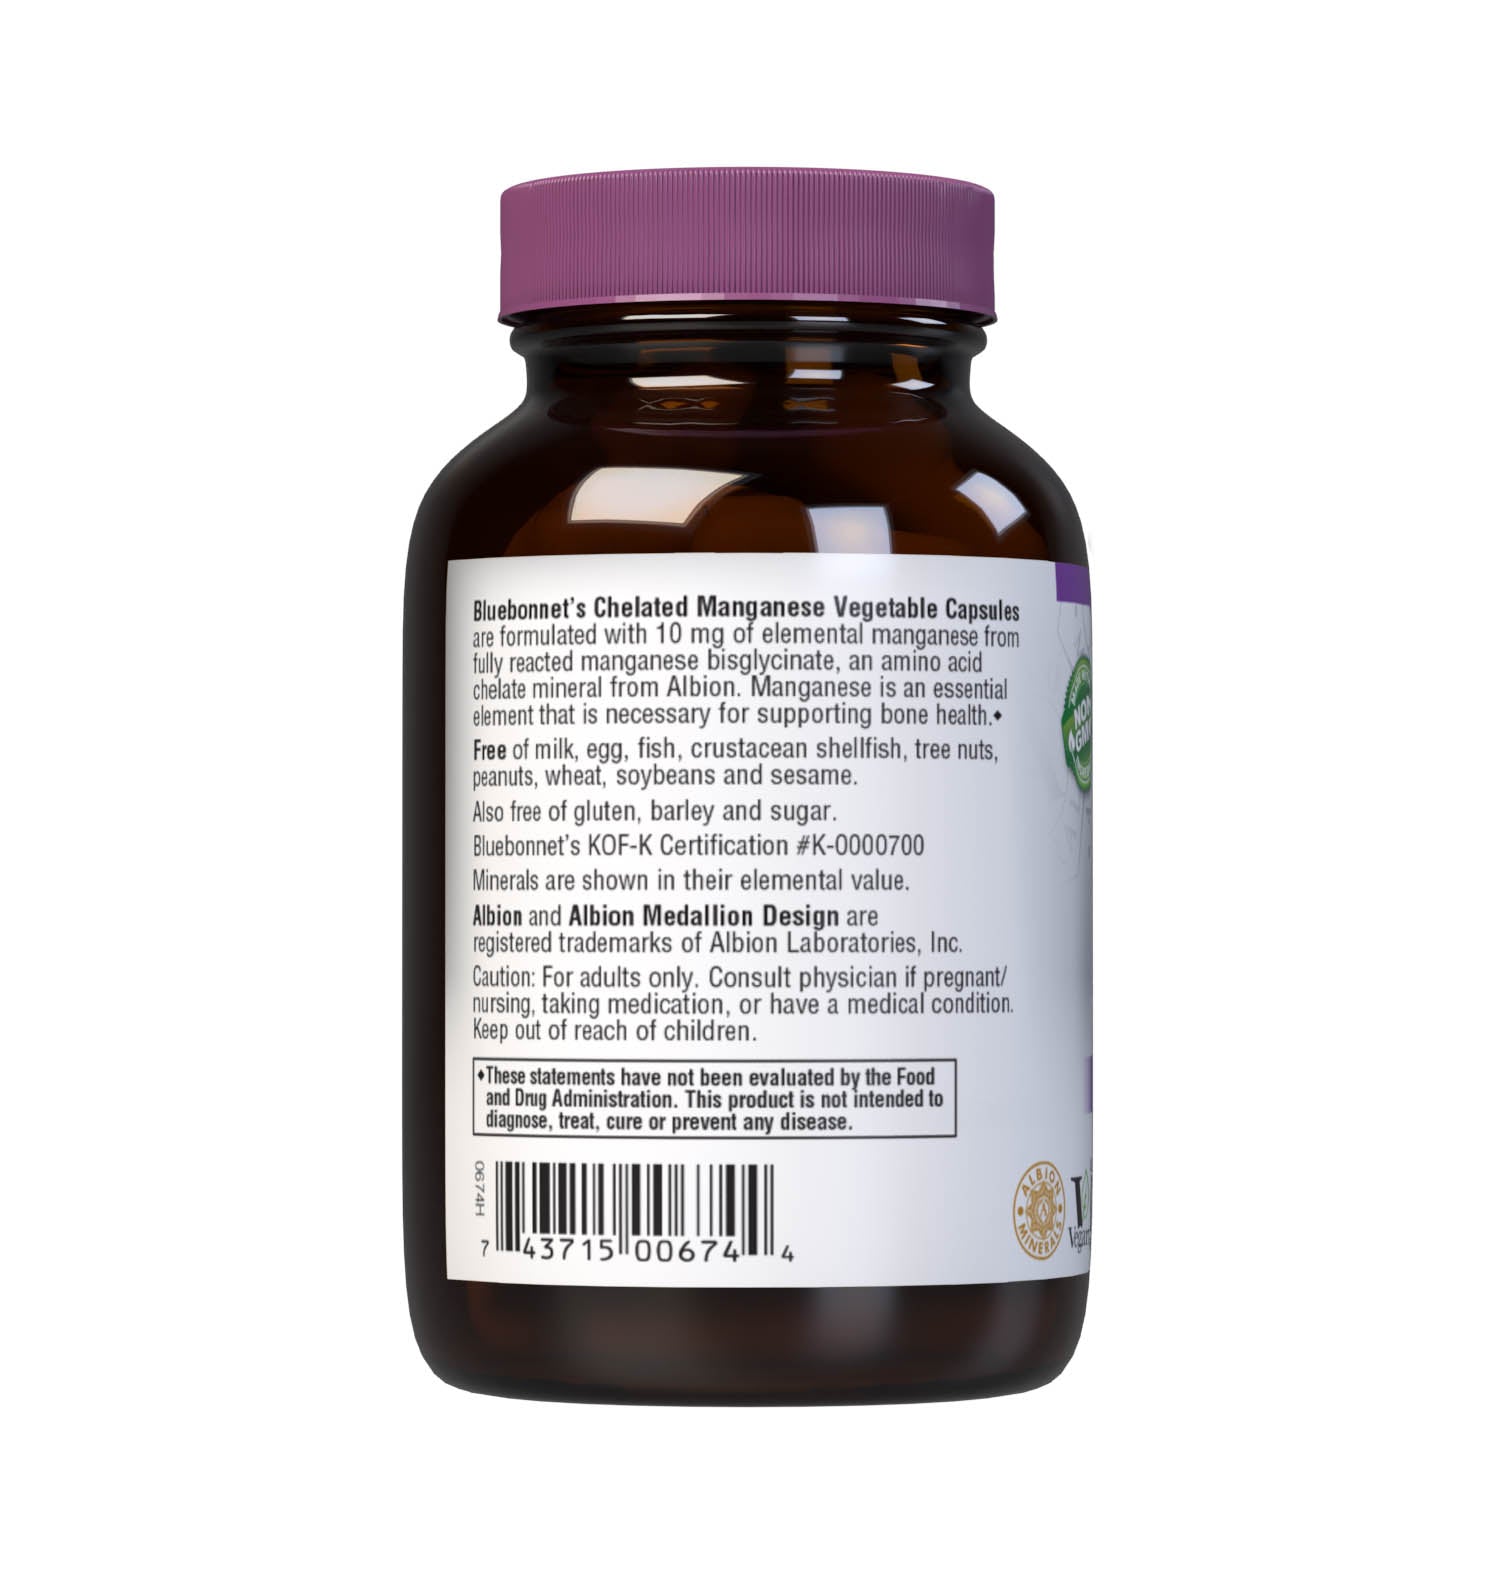 Bluebonnet's Chelated Manganese 90 Vegetable Capsules are formulated with 10 mg of elemental manganese from fully reacted manganese bisglycinate, an amino acid chelate mineral from Albion. Manganese is an essential element that is necessary for supporting bone health. Description panel. #size_90 count